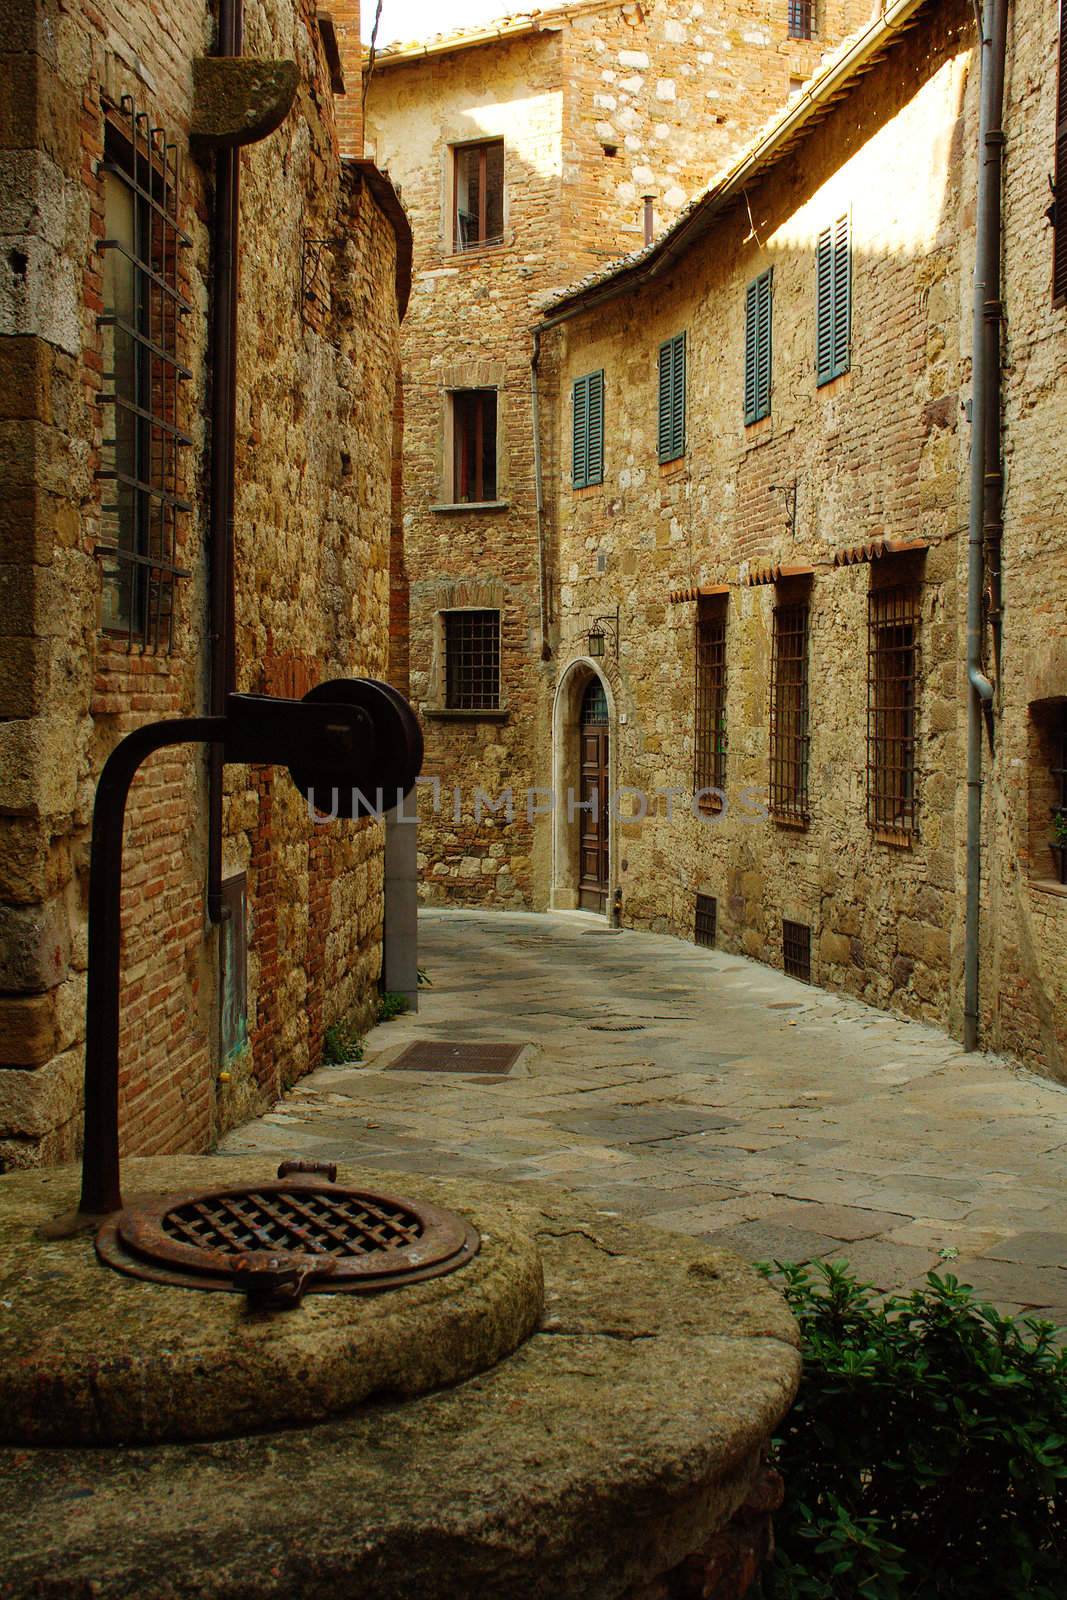 Street of Montepulciano village with a pit in the foreground in Tuscany, Italy